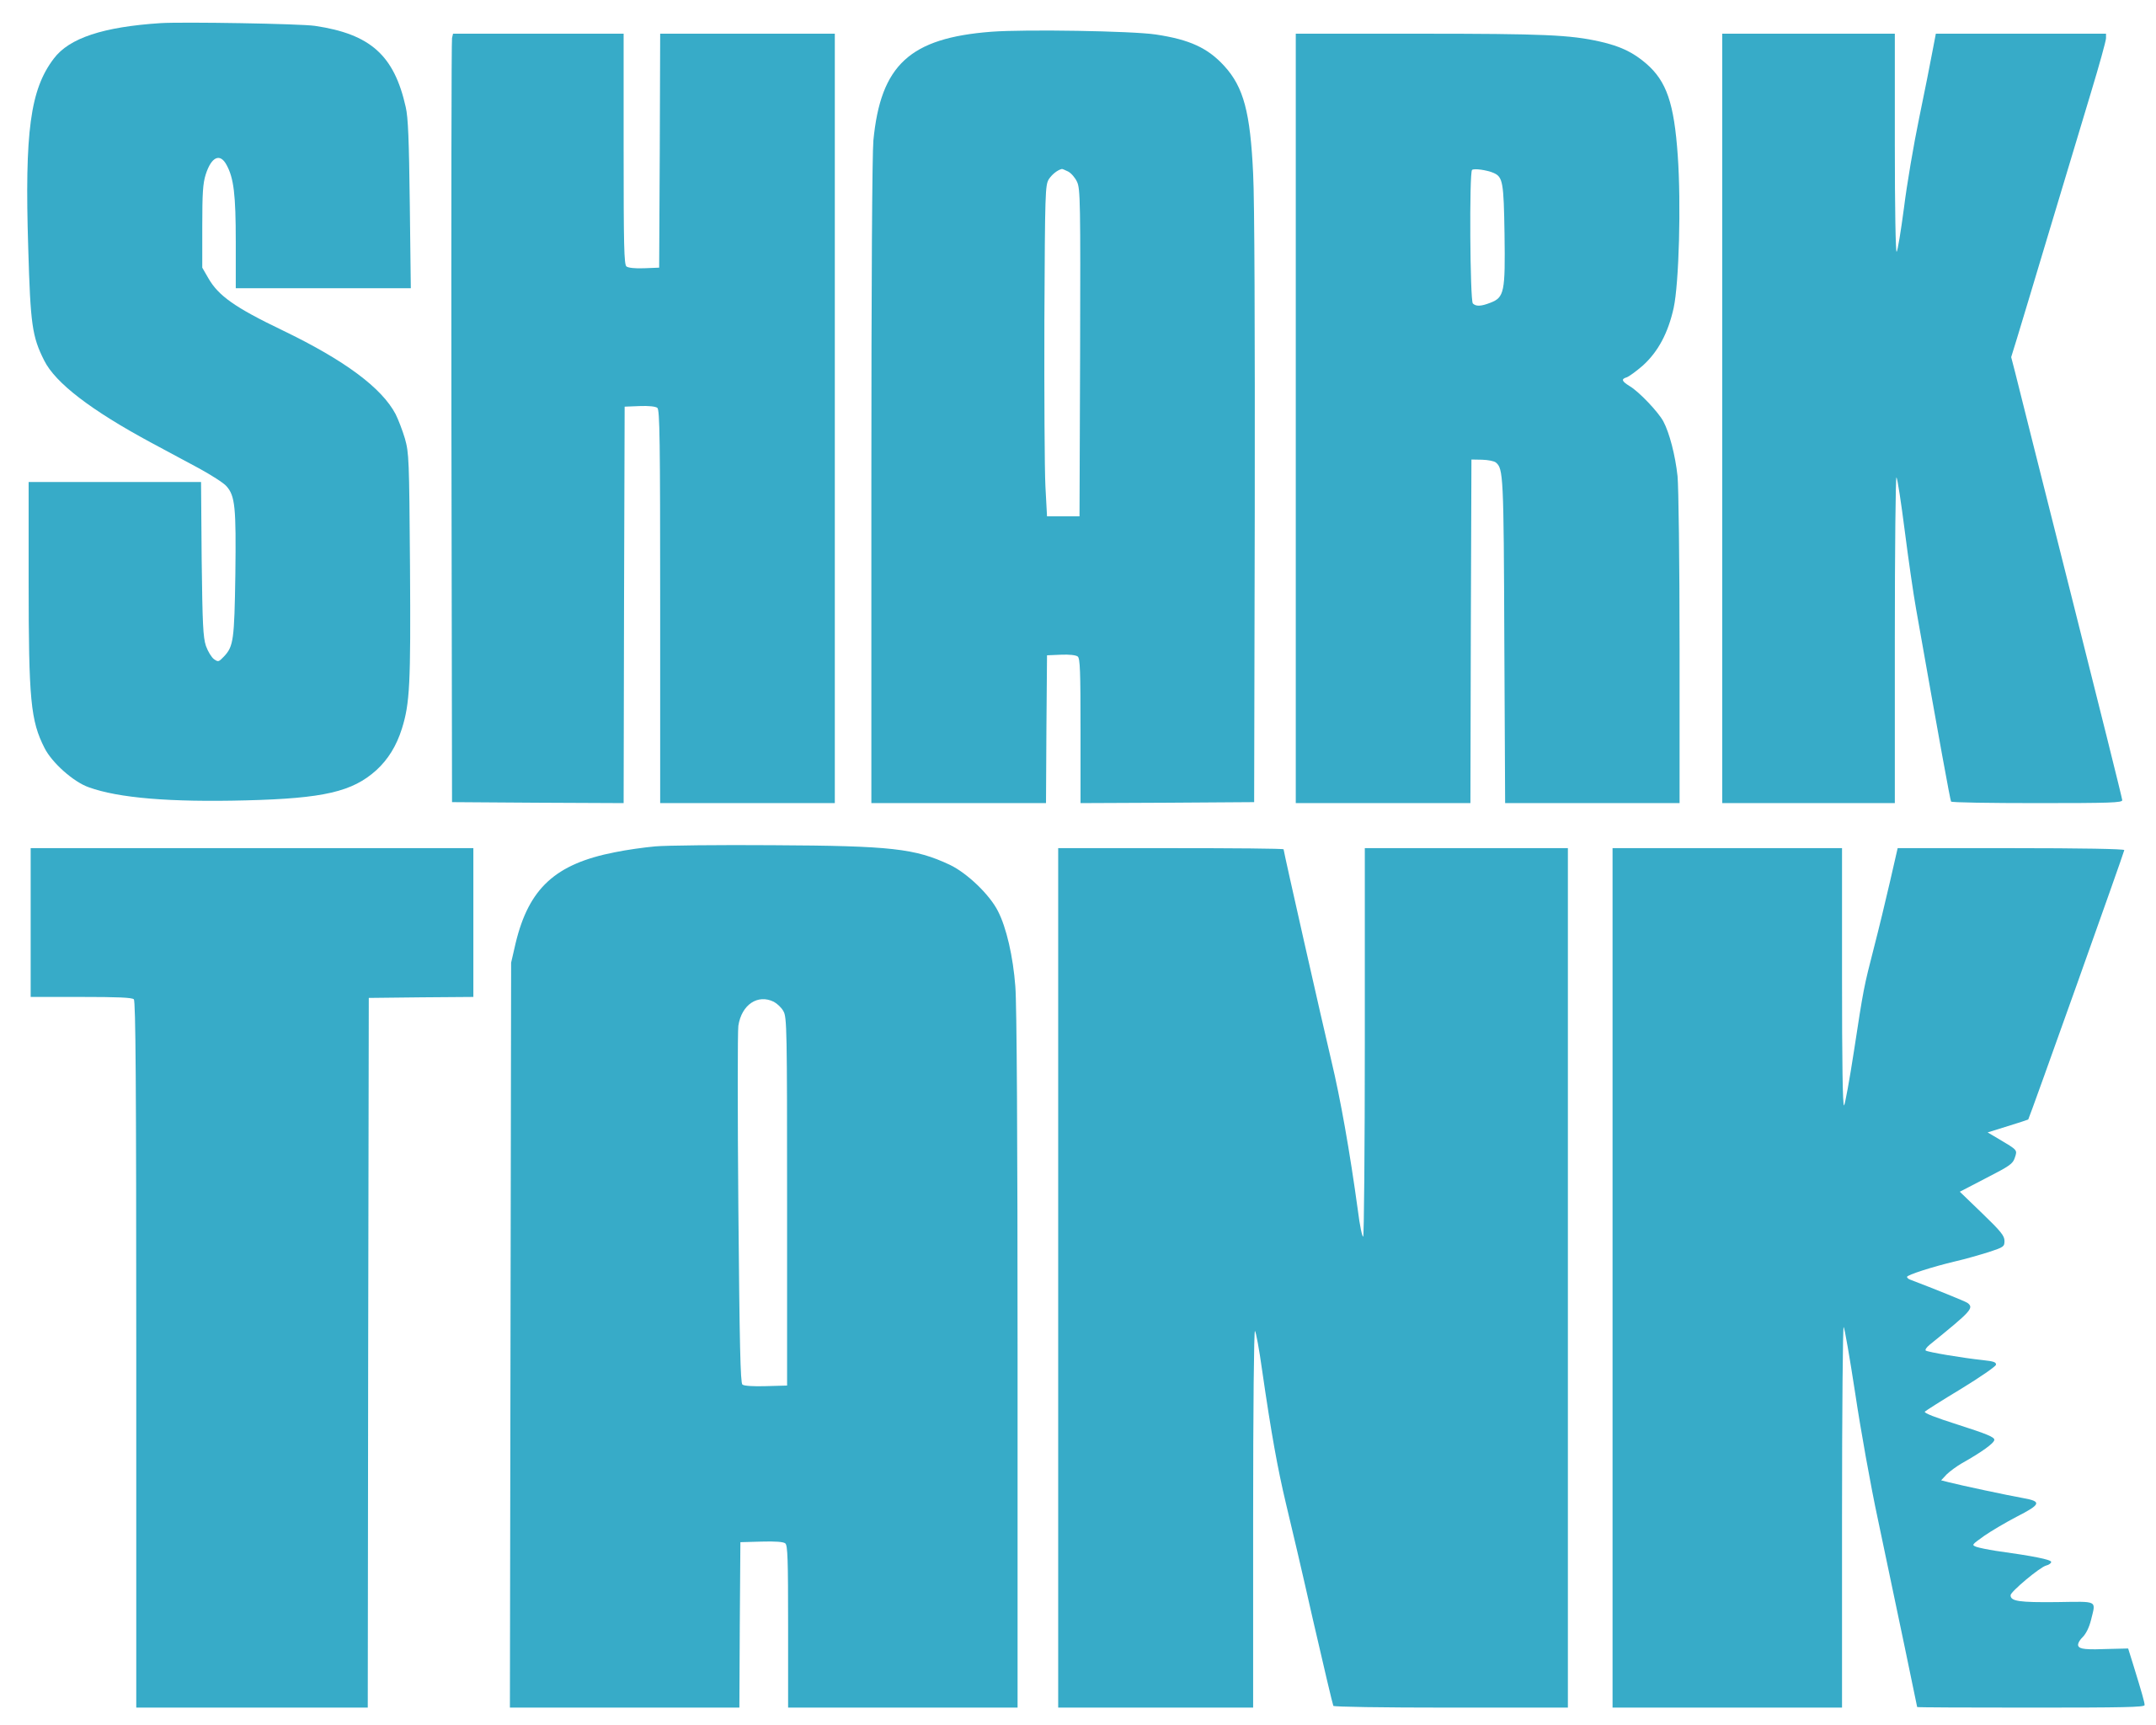 Shark Tank TV logo in the success section of the Spikeball website